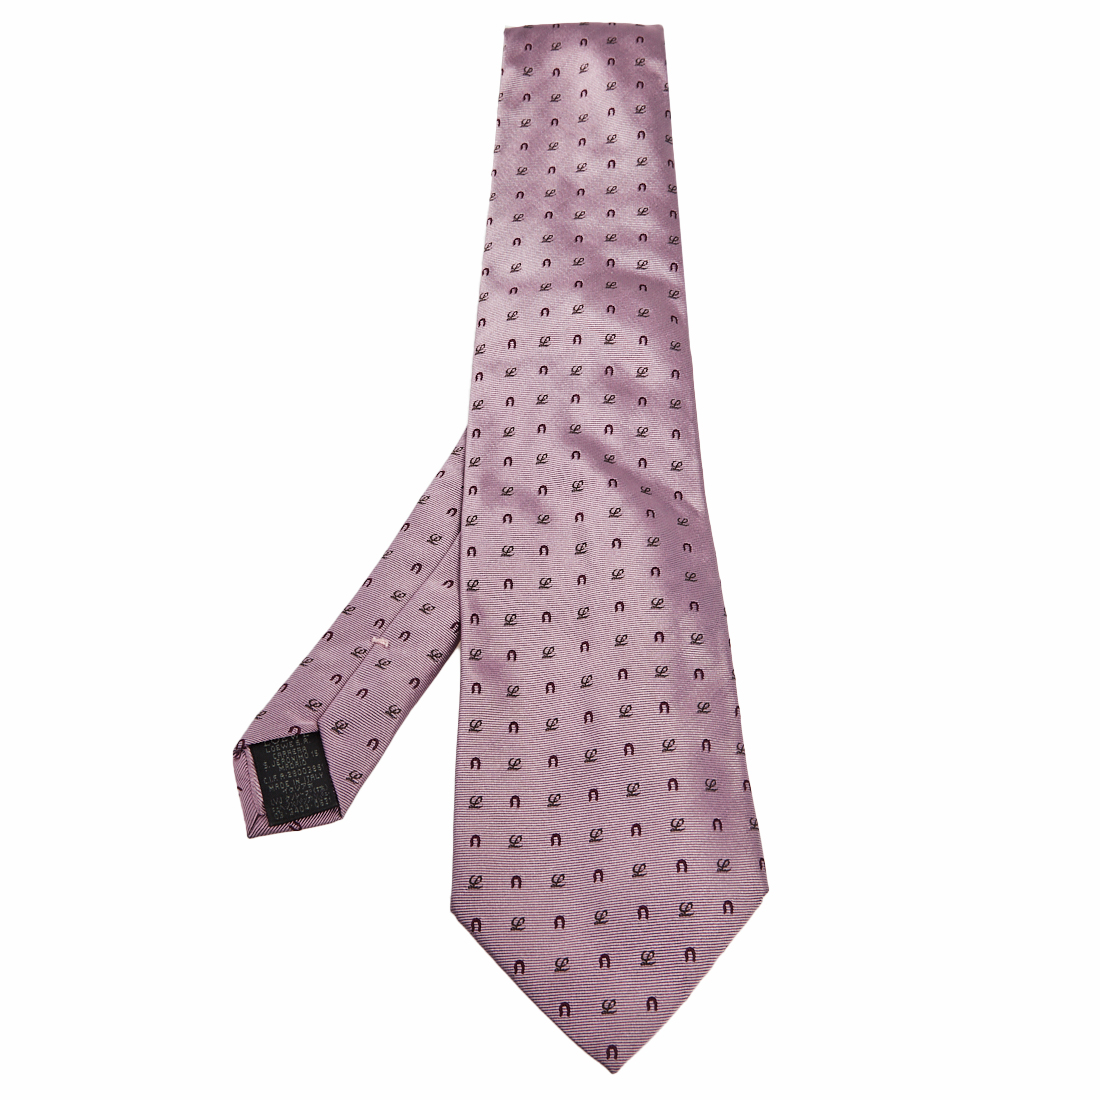 This Loewe tie is a perfect formal accessory that has a sharp and modern appeal. Made from luxurious materials it features intricate patterns and the brand label neatly stitched at the back. It is sure to add oodles of style to your blazers.